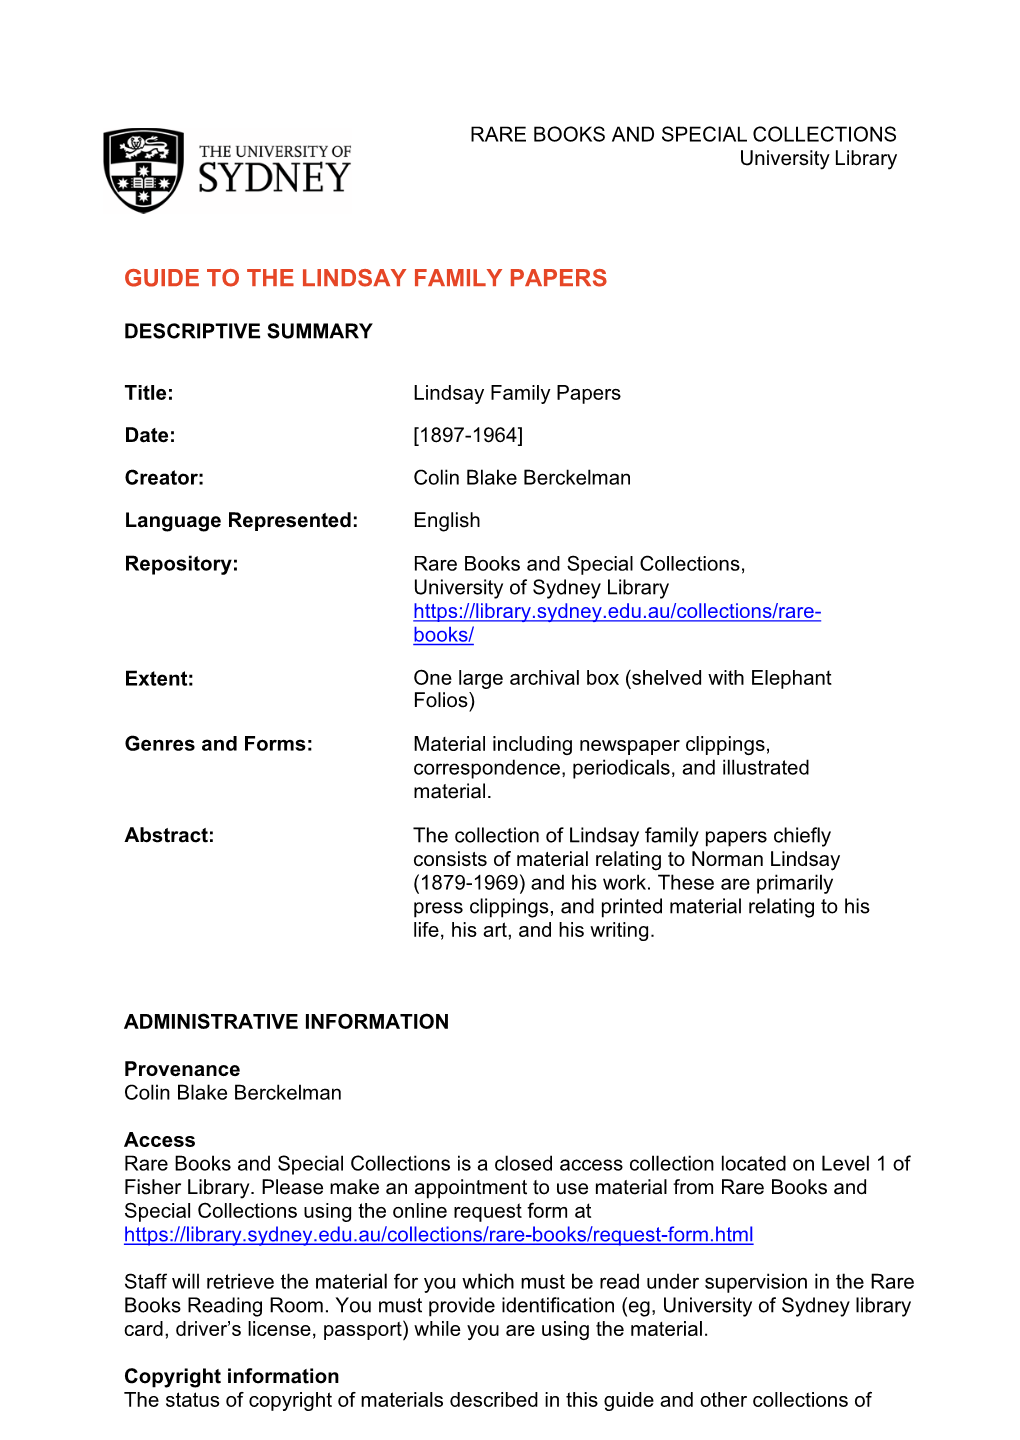 Guide to the Lindsay Family Papers